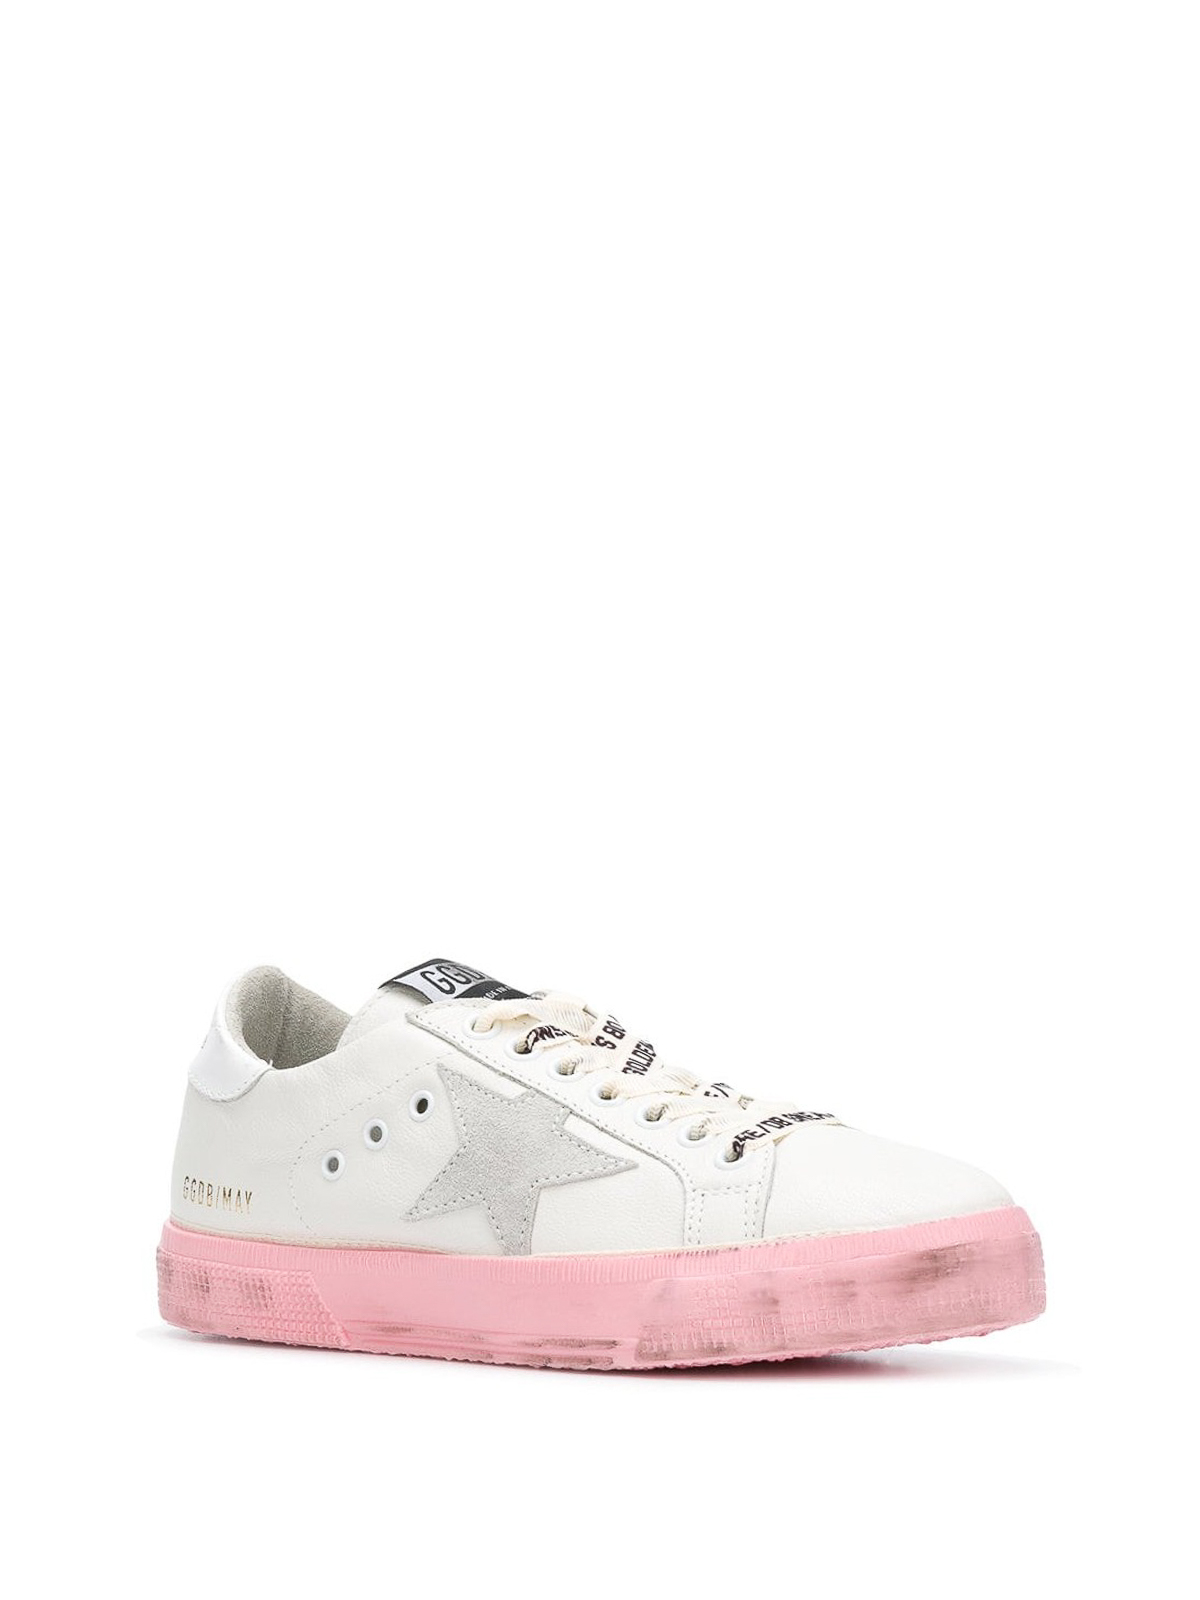 Golden Goose - May pink sole leather 